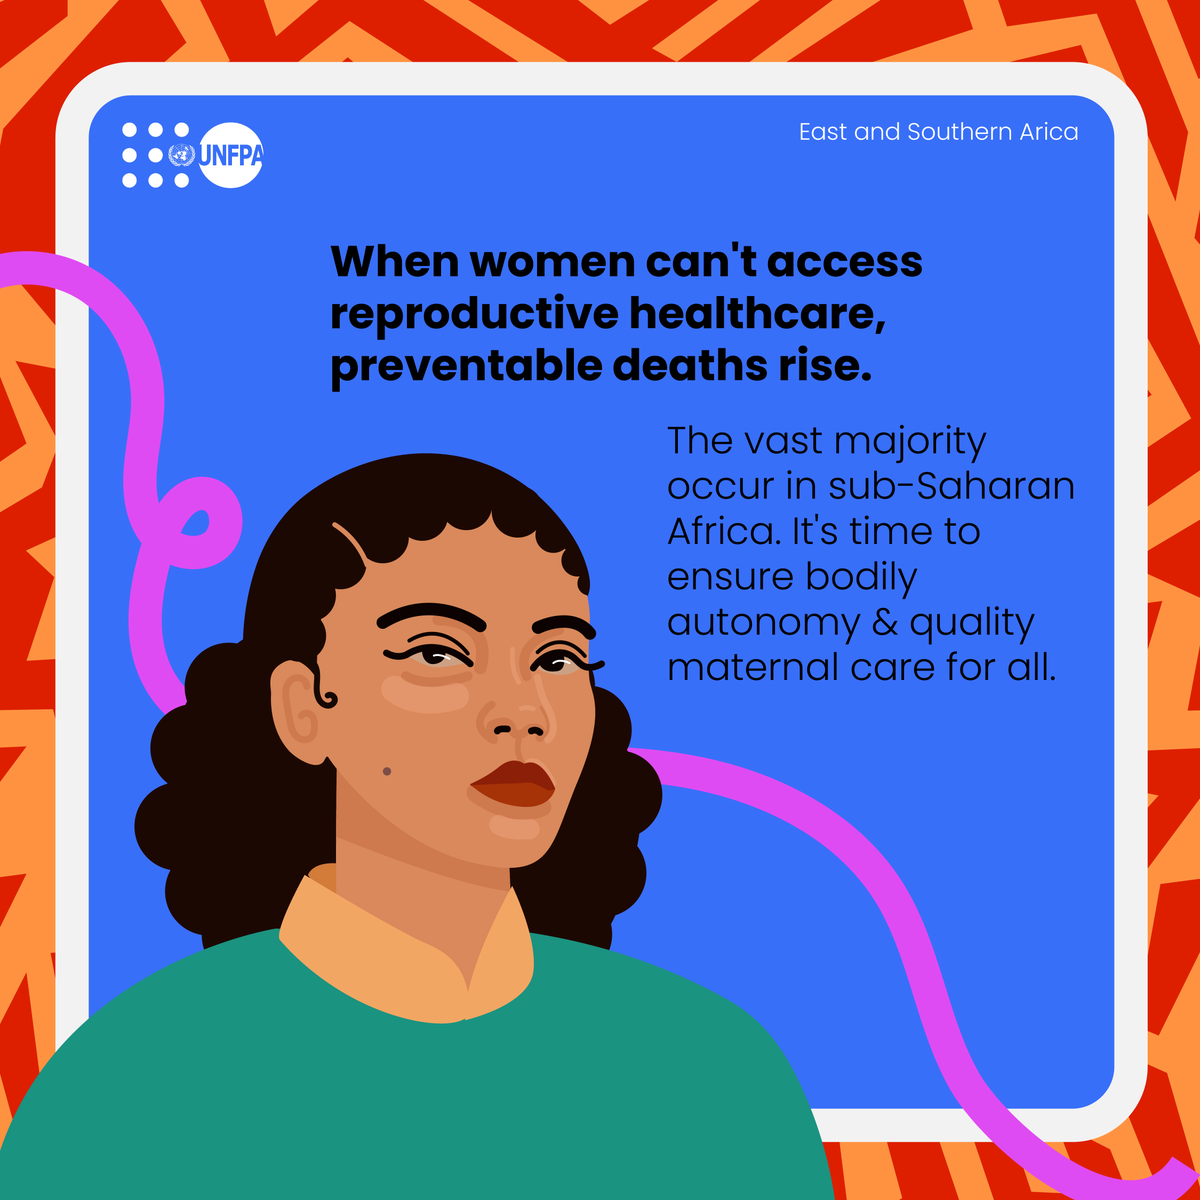 When women lack access to reproductive healthcare, preventable deaths soar 📈, especially in sub-Saharan Africa. It's time to break barriers and ensure every woman has the right to quality maternal care and bodily autonomy. #EndMaternalMortality #HealthEquity Attachments